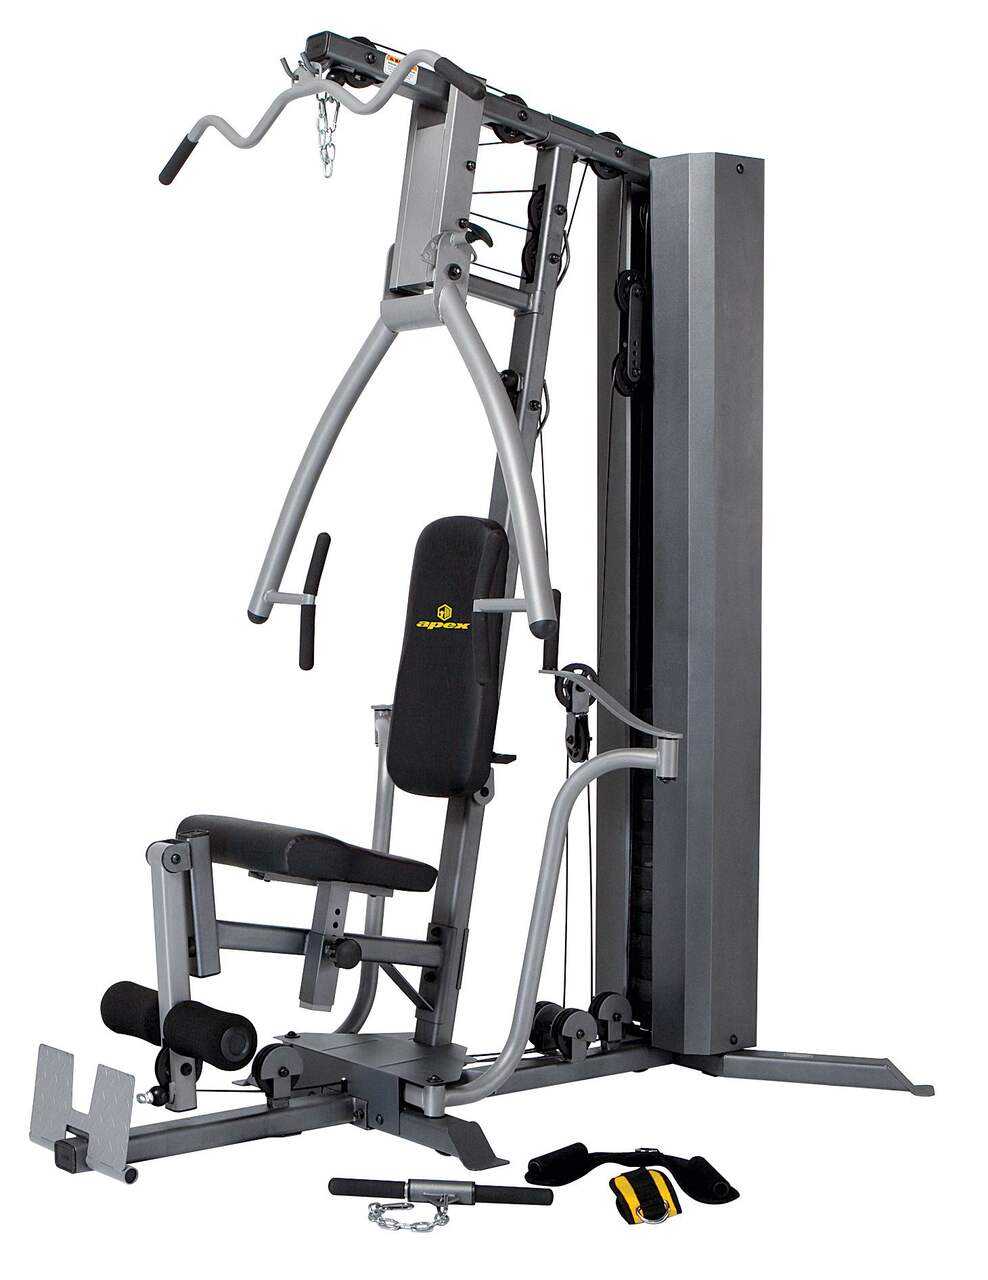 https://media-www.canadiantire.ca/product/playing/exercise/exercise-equipment/0840525/200lb-stack-home-gym-56d9d8e9-4009-47c0-9ee0-a428b150e9c1-jpgrendition.jpg?imdensity=1&imwidth=640&impolicy=mZoom